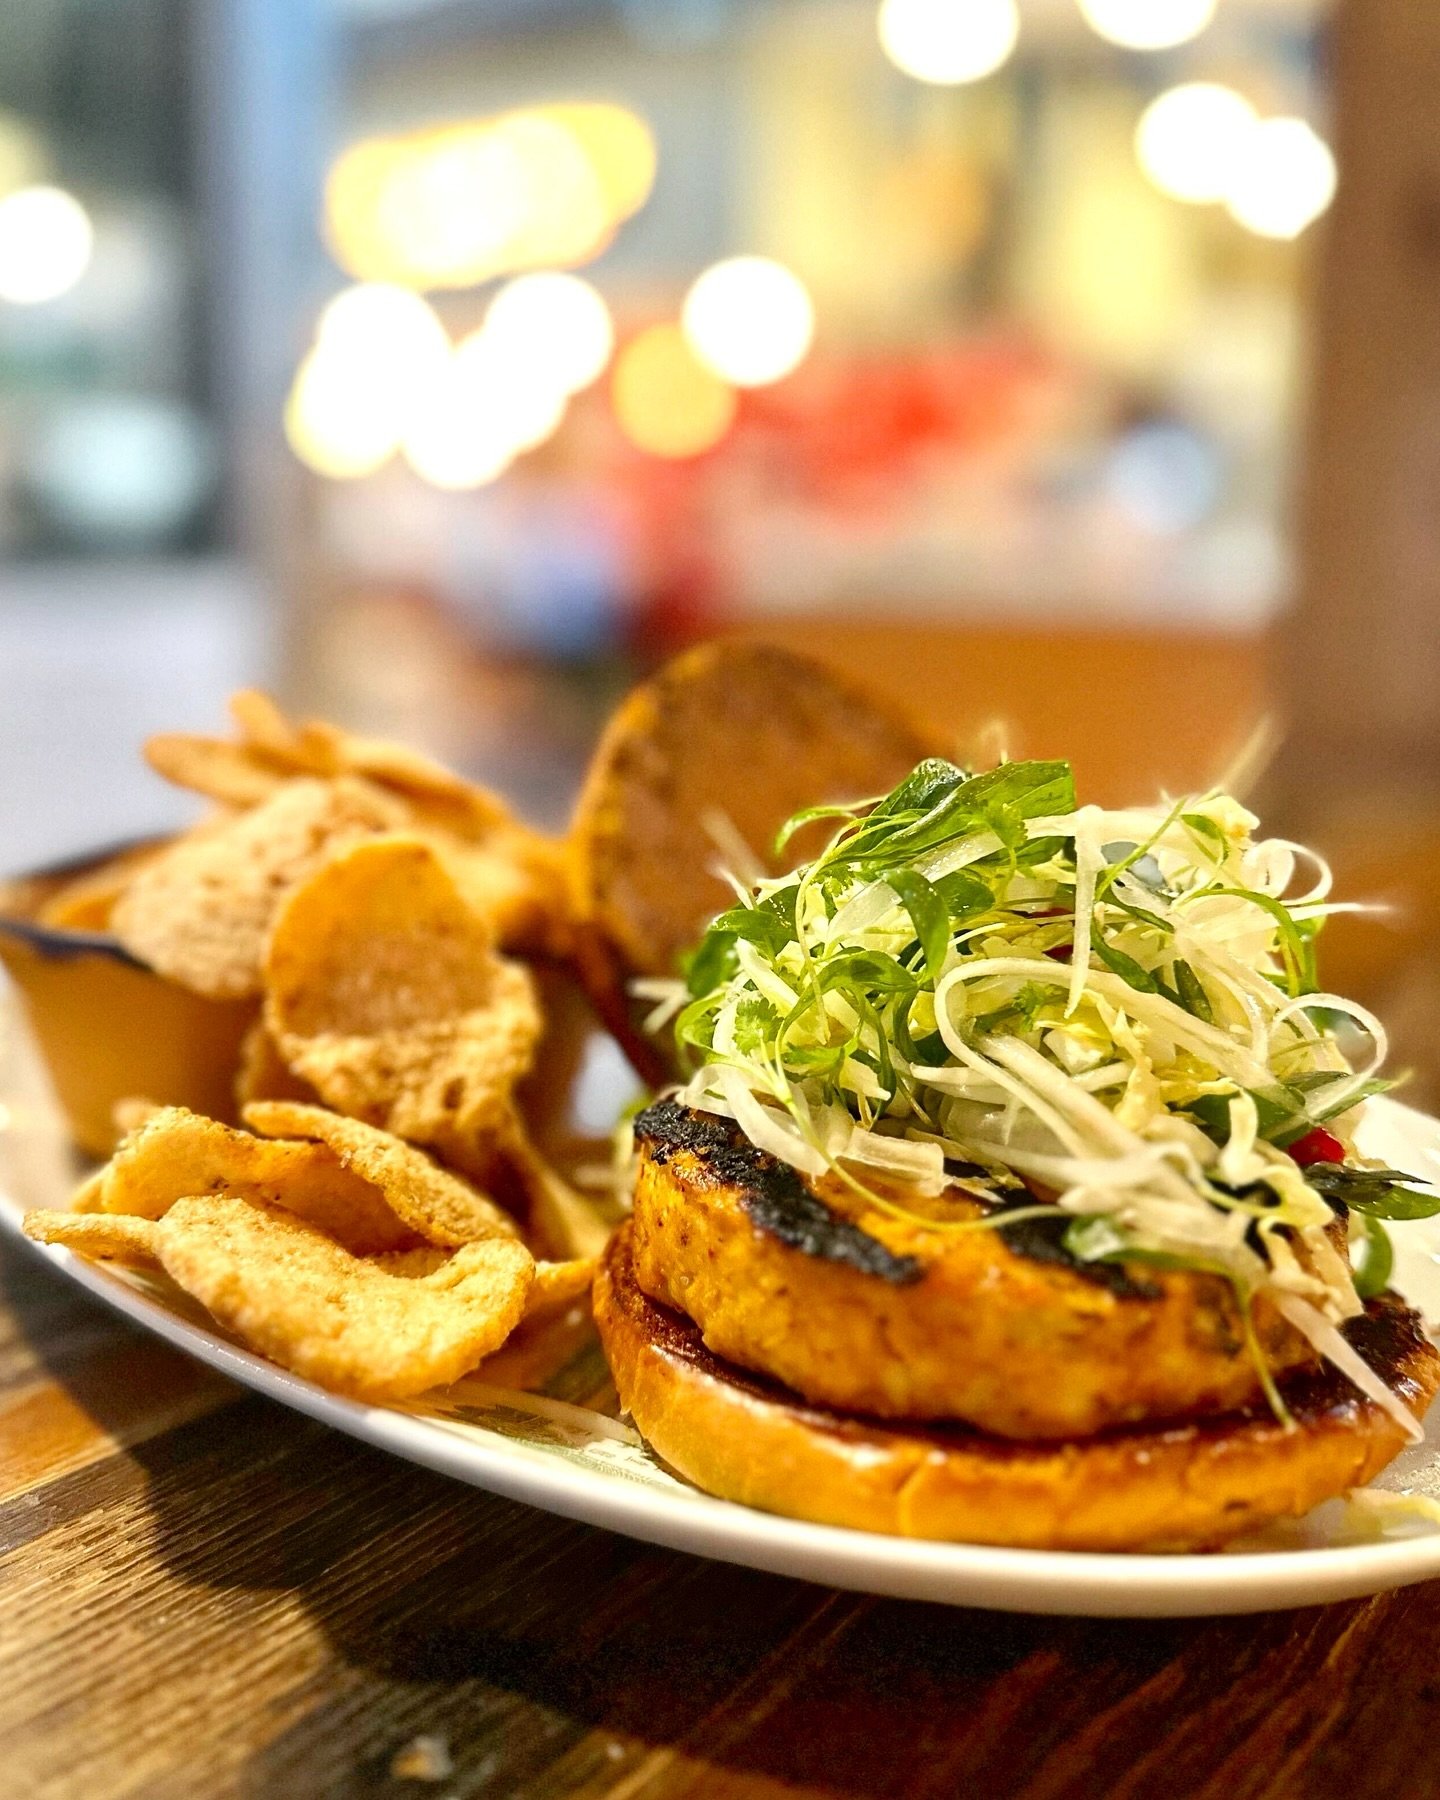 At long last, the Reef Burger has returned to The Club! A Member and Staff all-time favorite: Chargrilled Swordfish - Dressed Cabbage - Red Curry - Peanut Sauce - Shrimp Chips.
&bull;
Aaaand a little housekeeping: Sunday and Monday are pro nights at 